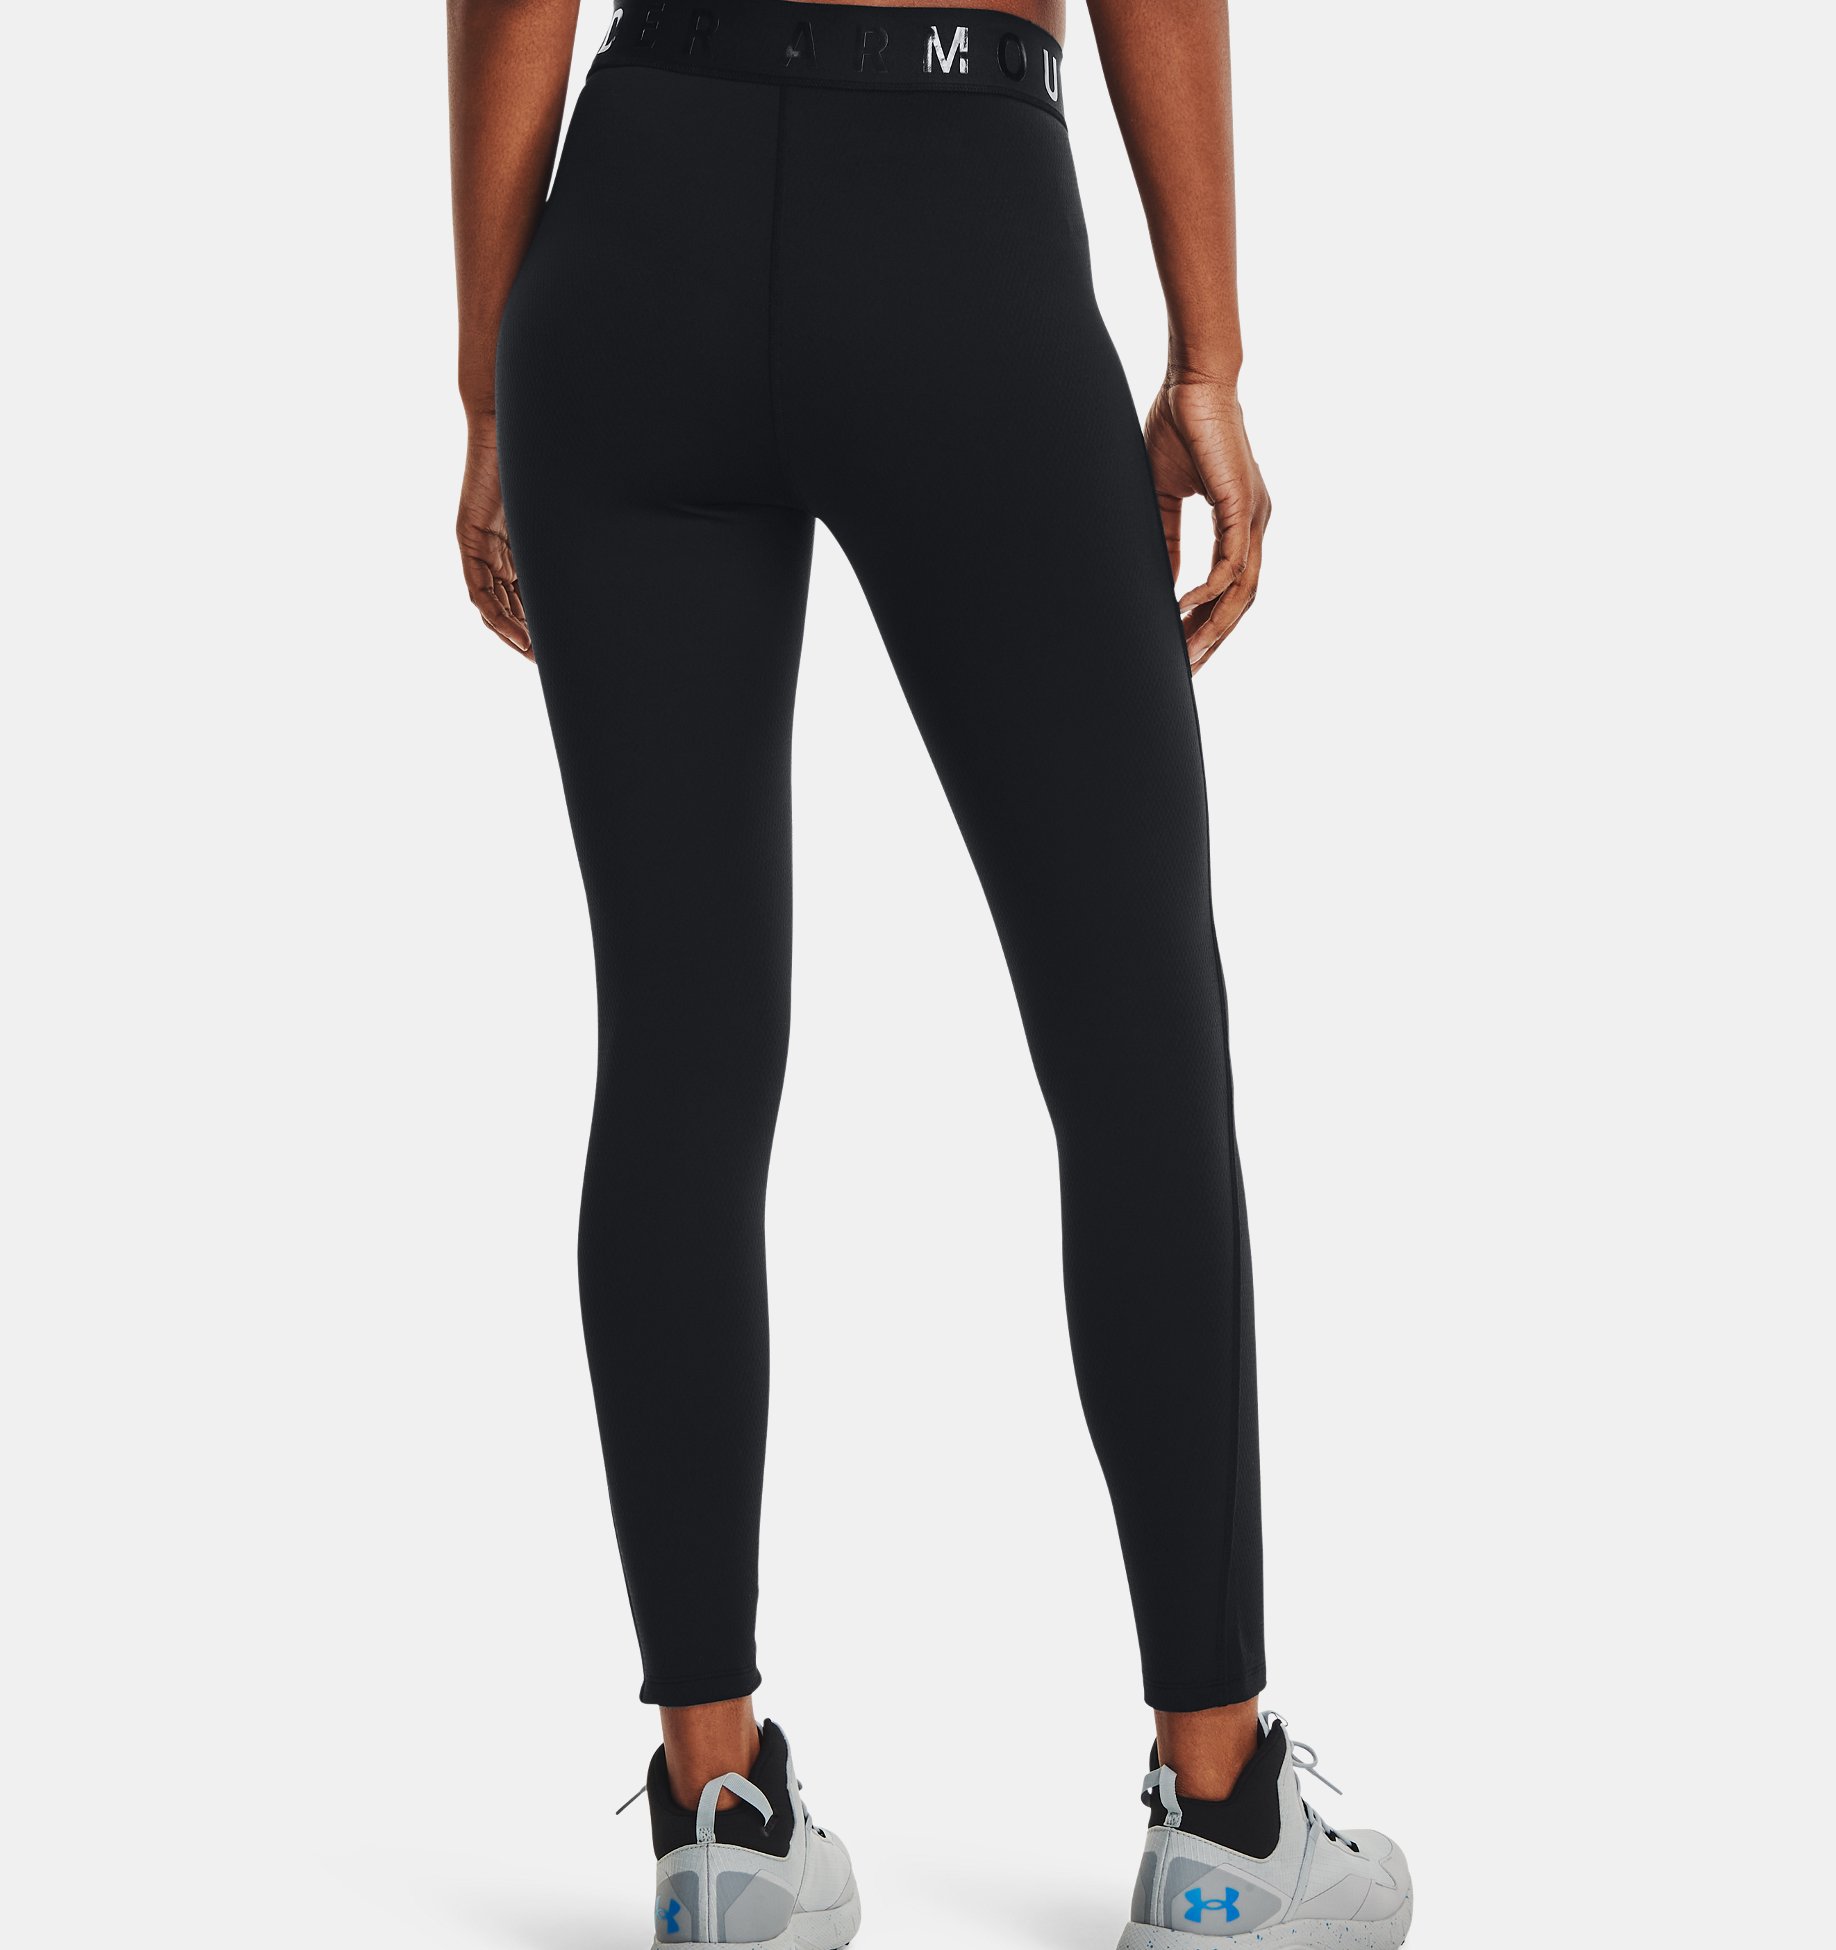 Details about   Under Armour Men's Packaged Base 3.0 Leggings 